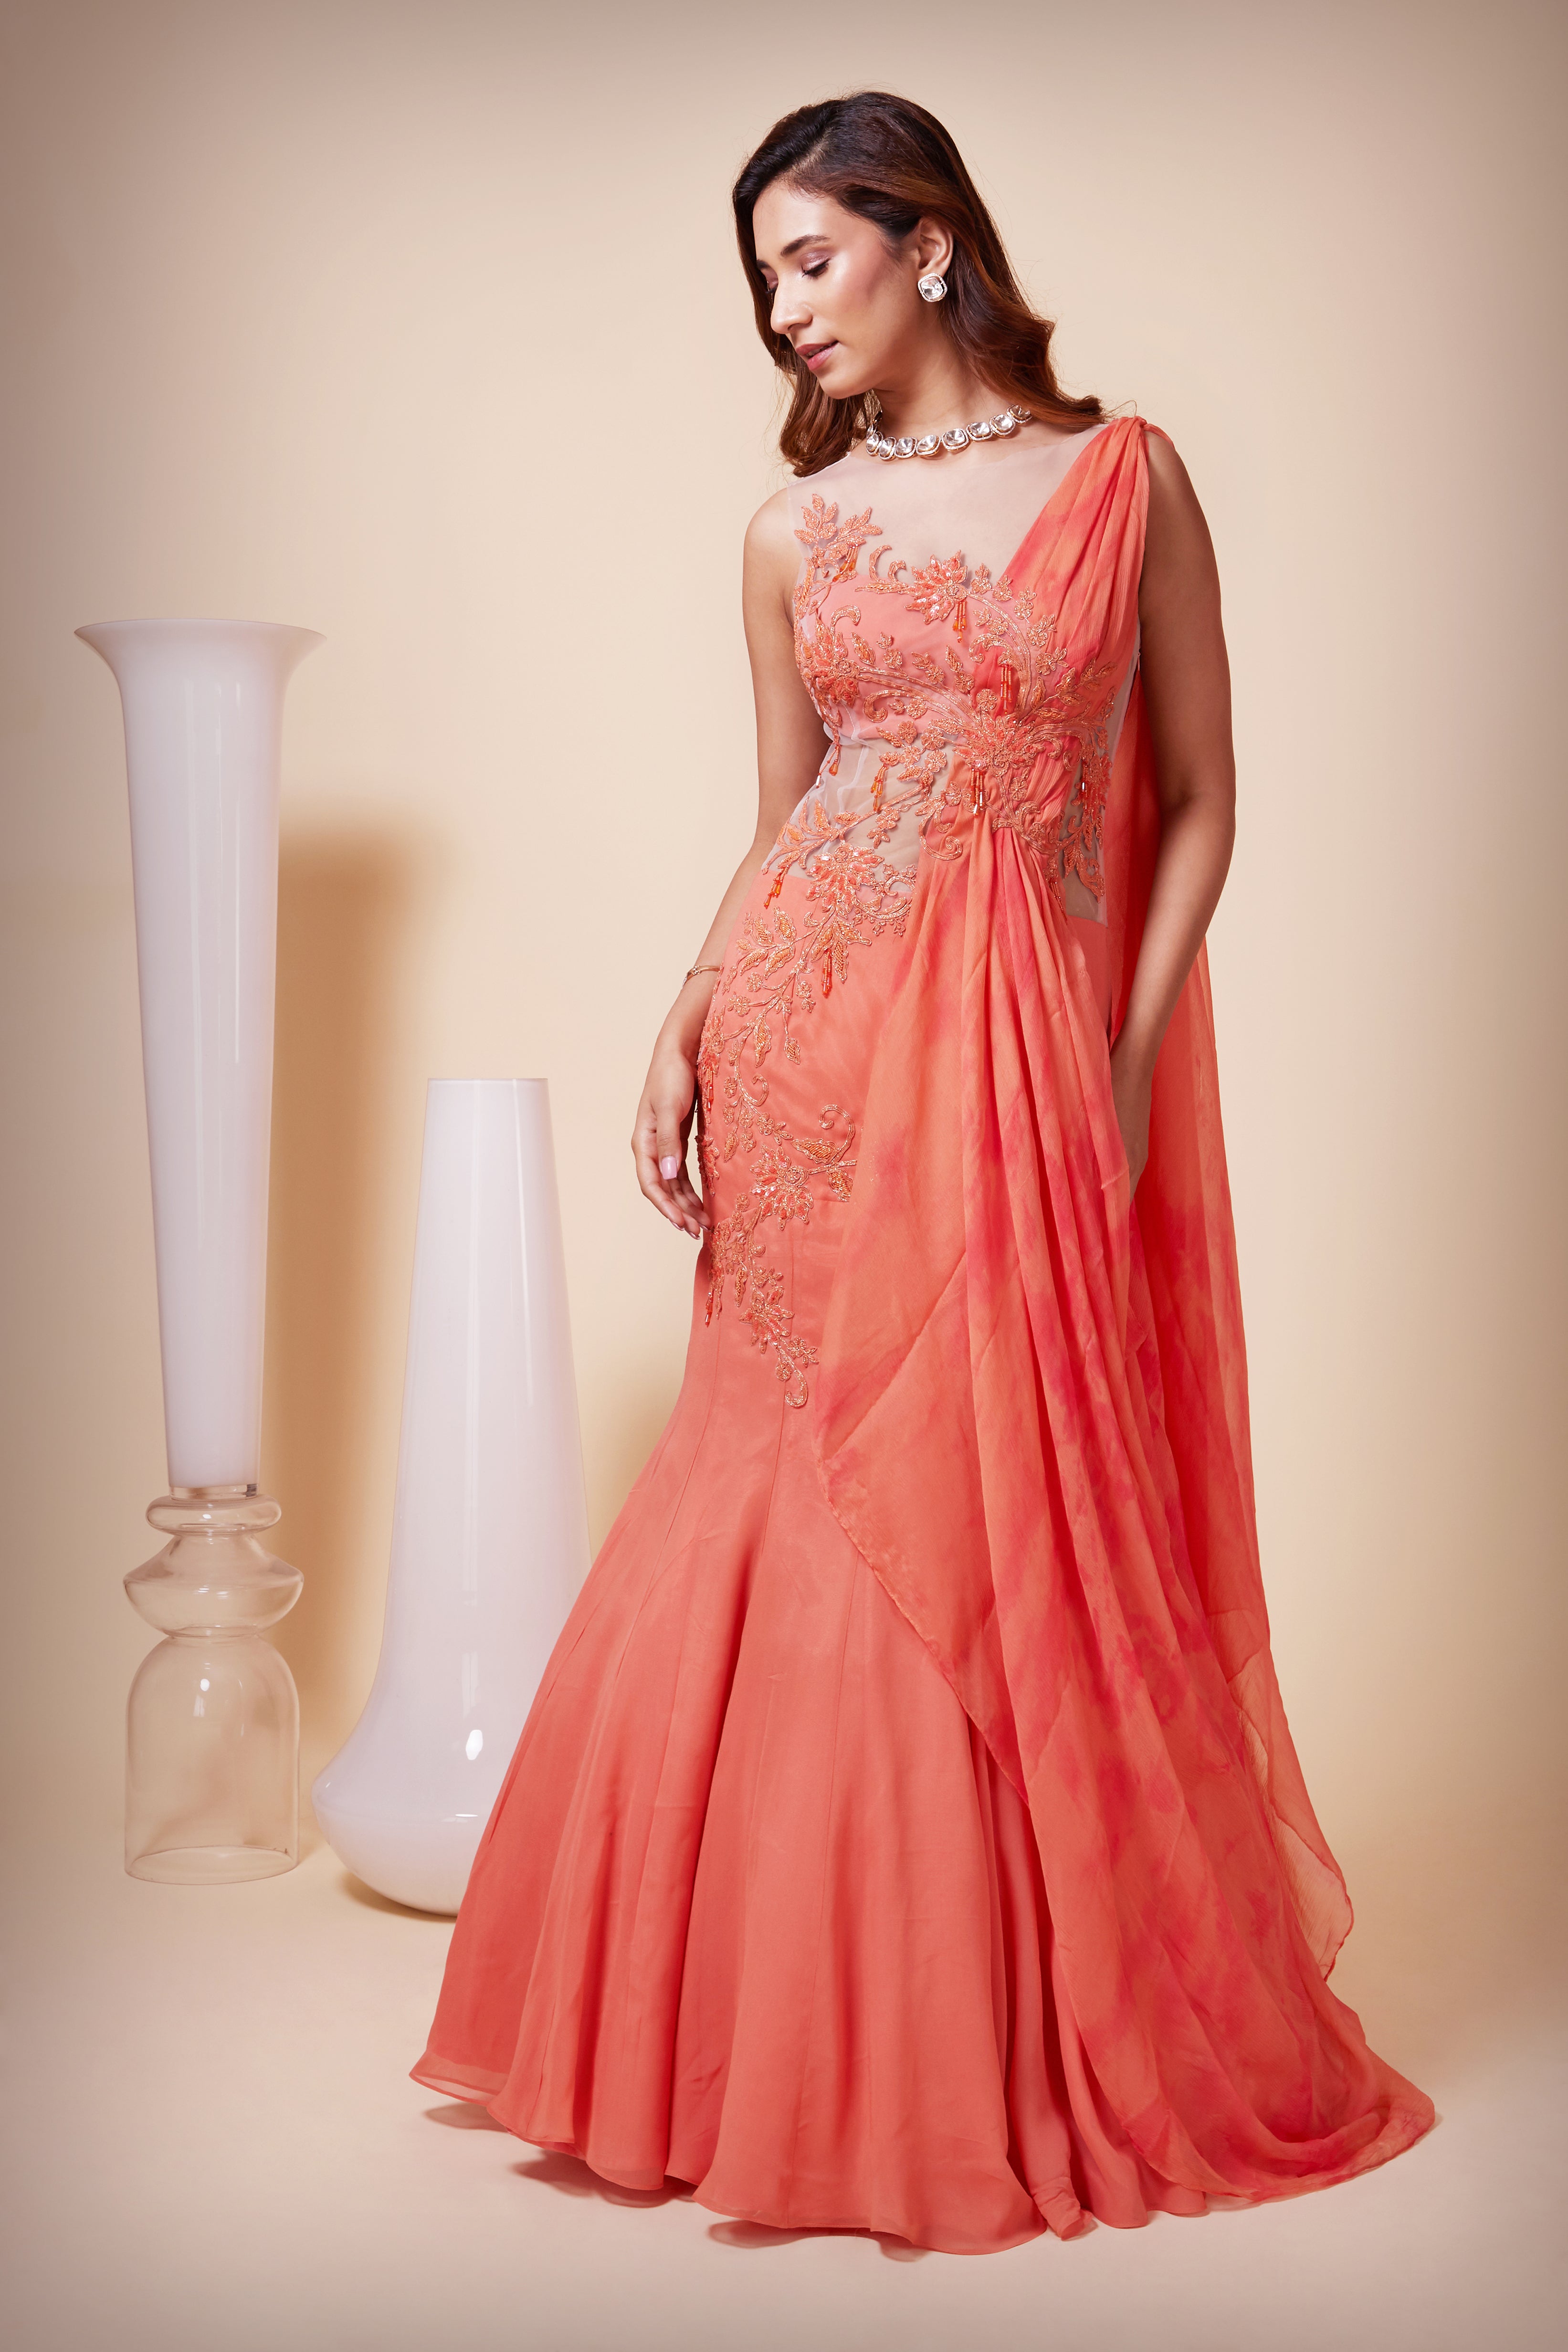 Finding The Perfect Party Wear Custom Made Saree Gown for You   ufreshlookfashioncom